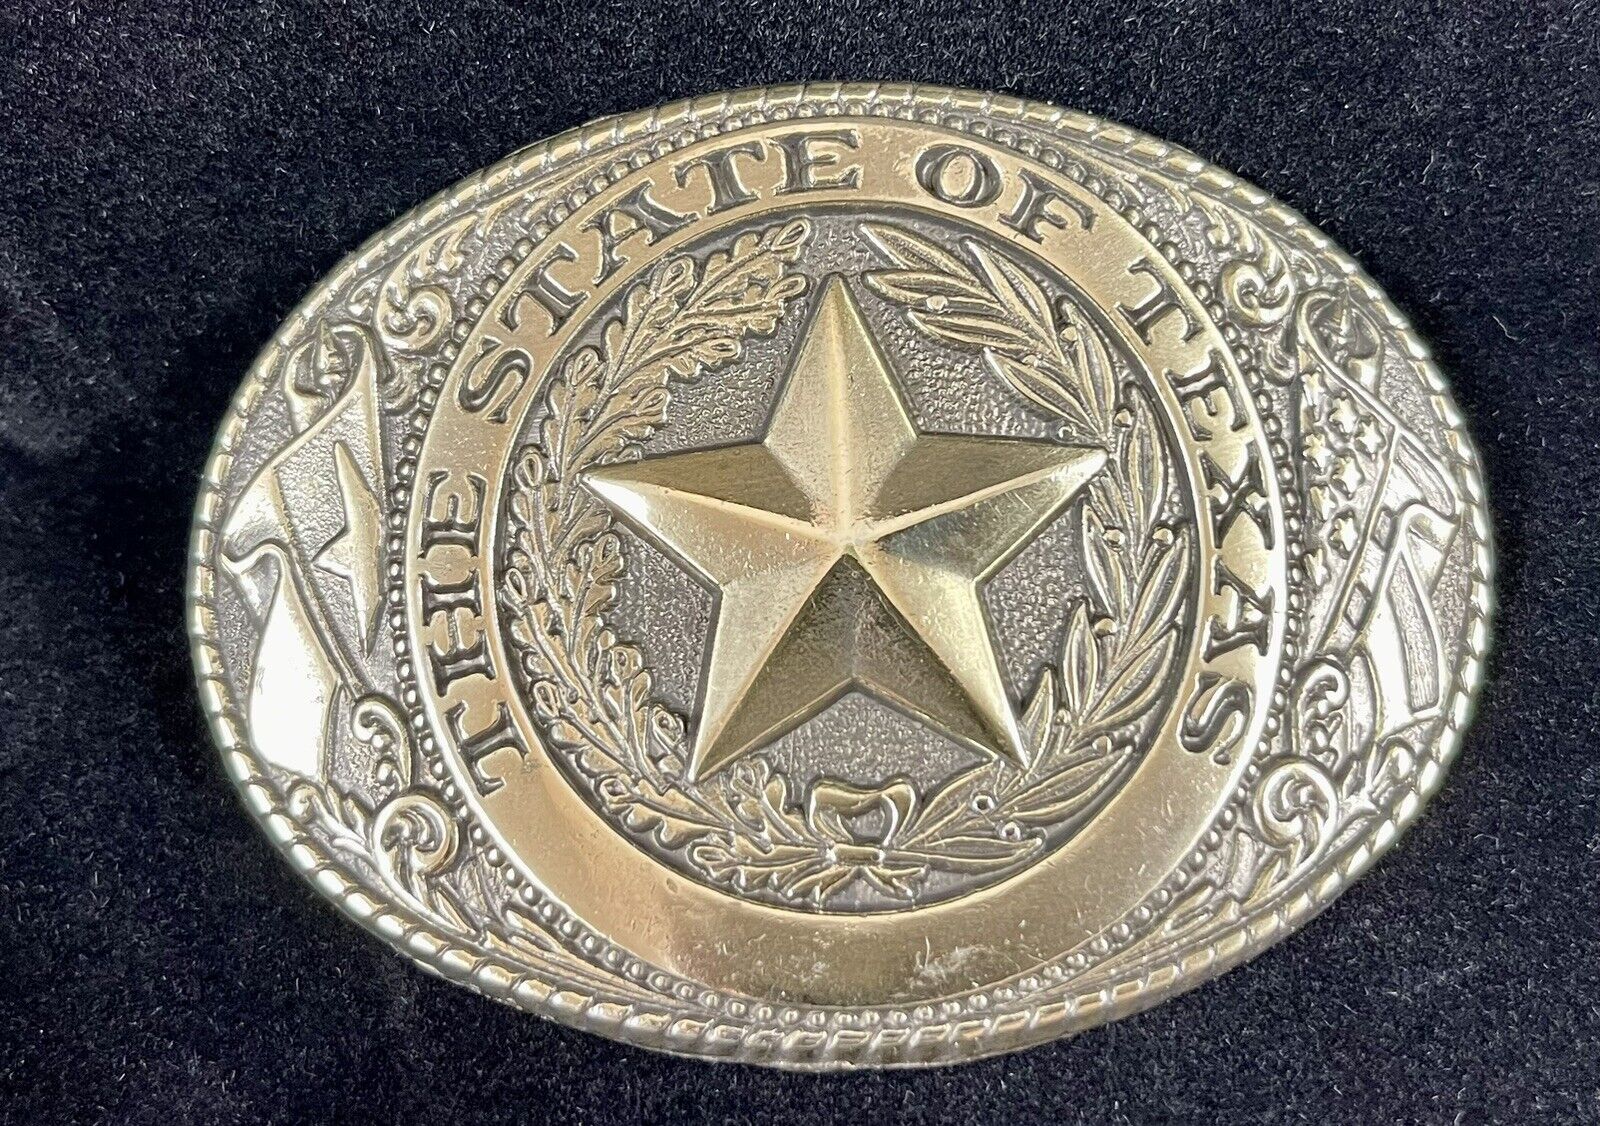 Vintage The State of Texas Belt Buckle Gold Tone USA Western Buckle Solid Brass